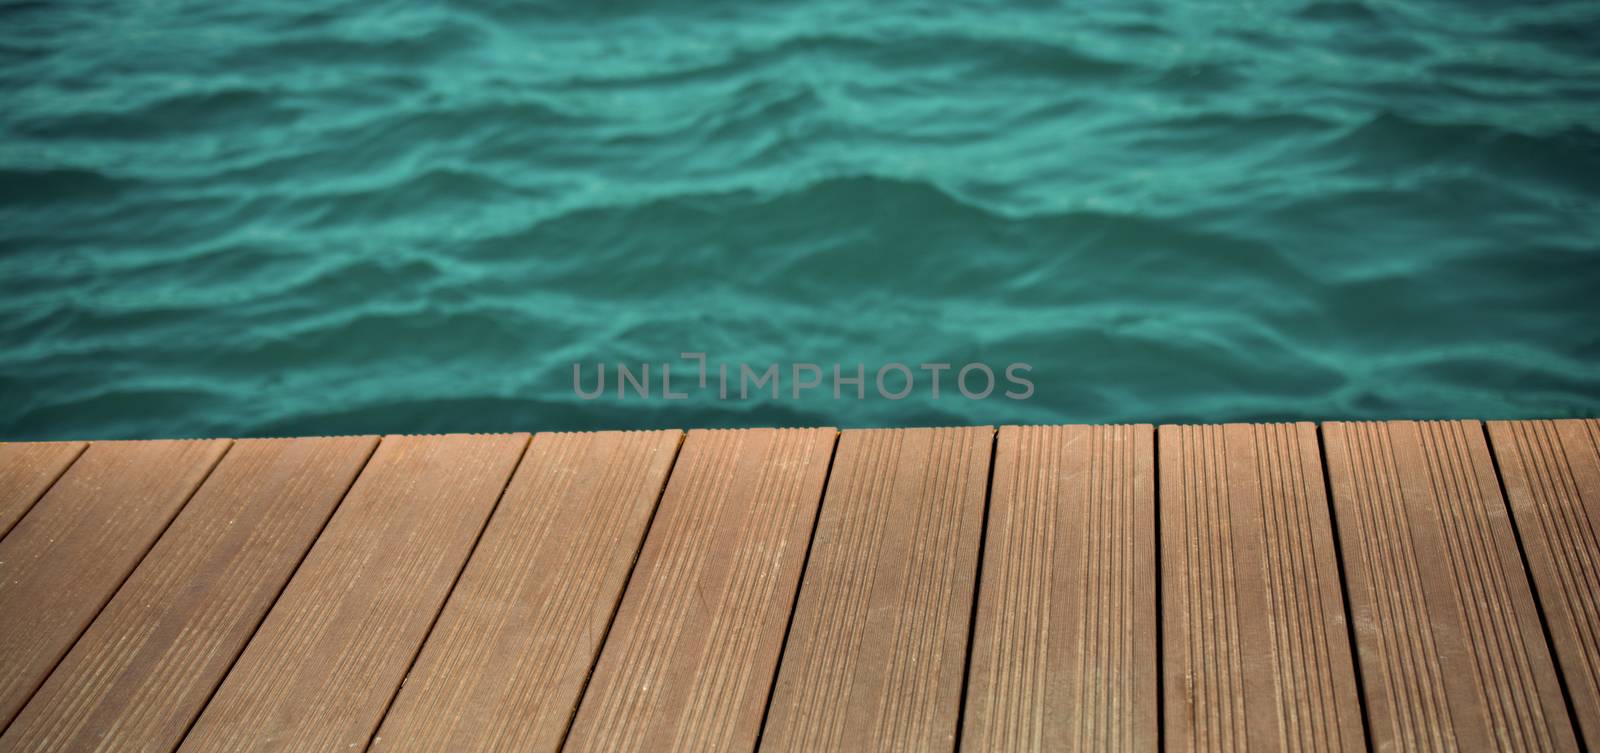 Water and wood texture as a background by berkay